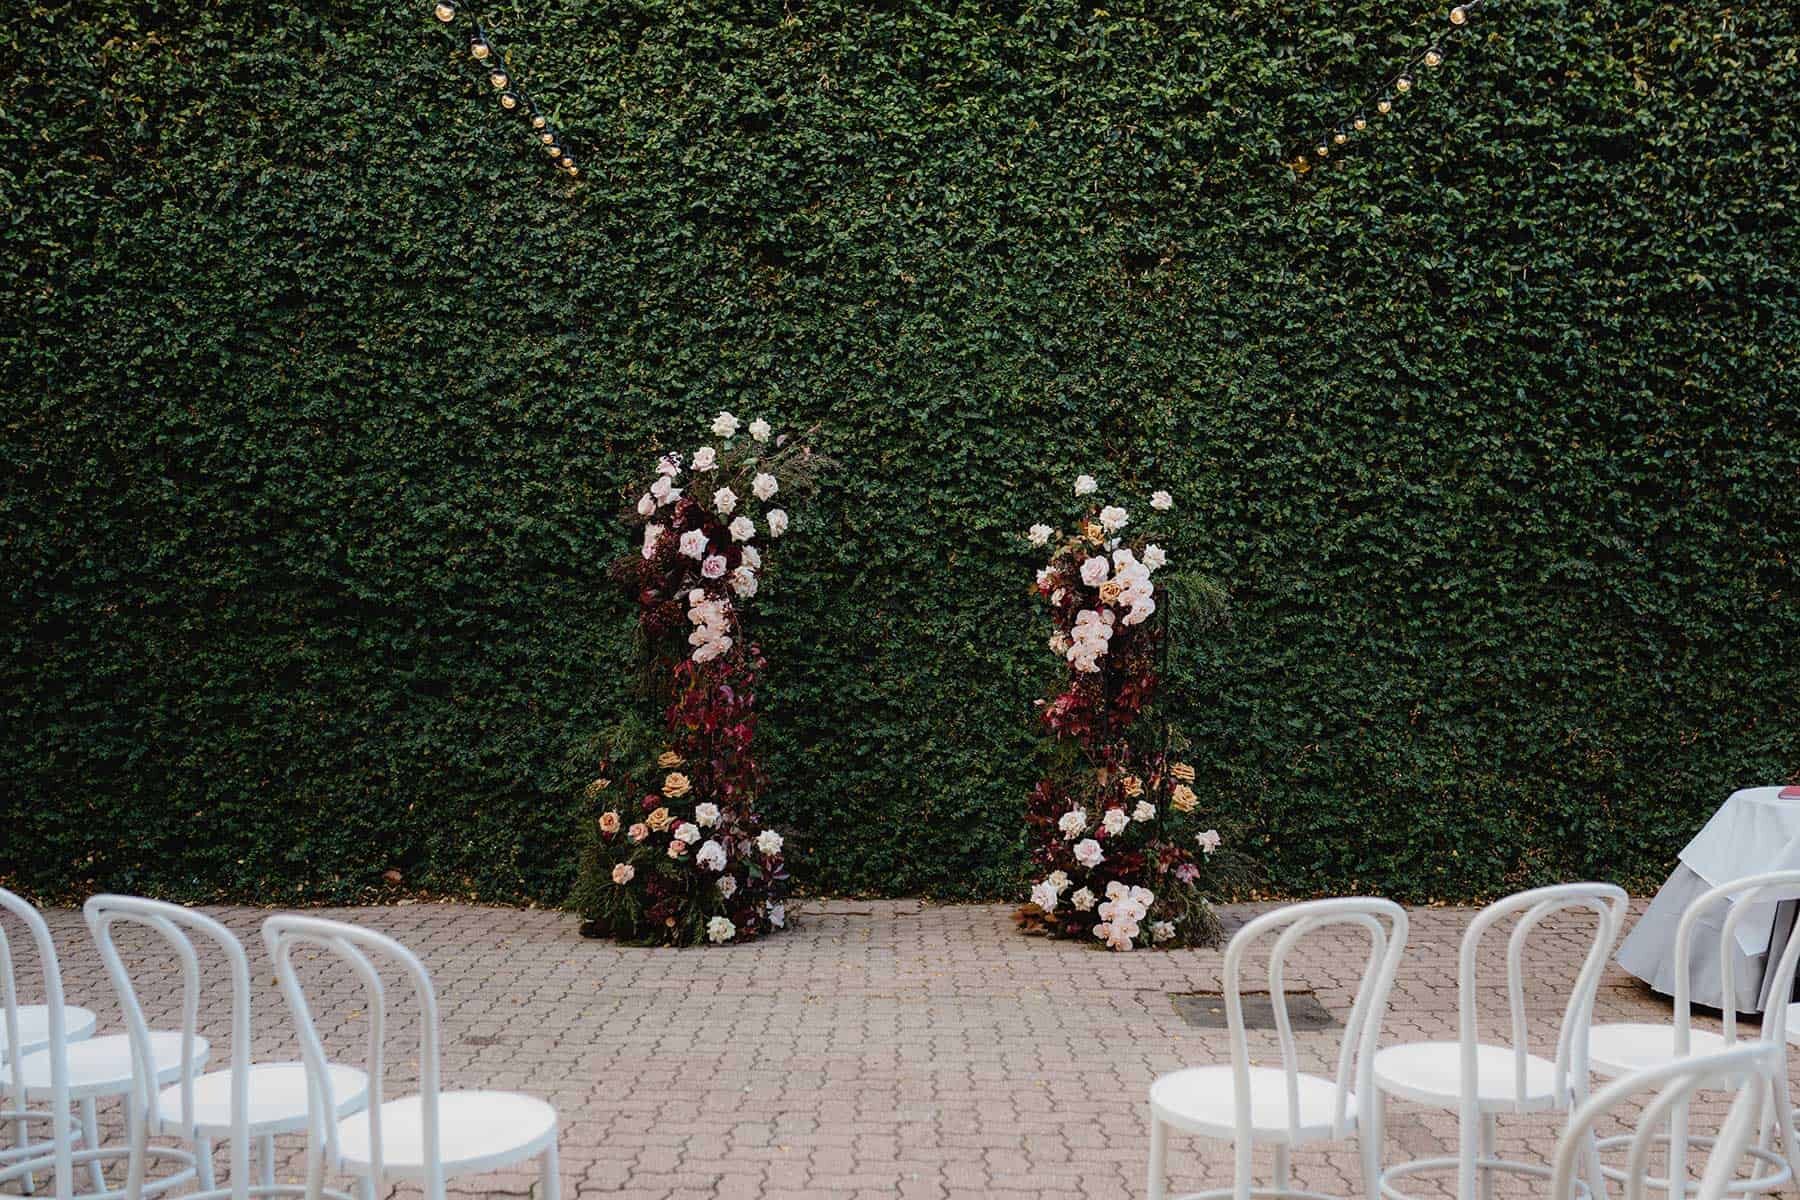 floral wedding arbour against green ivy wall